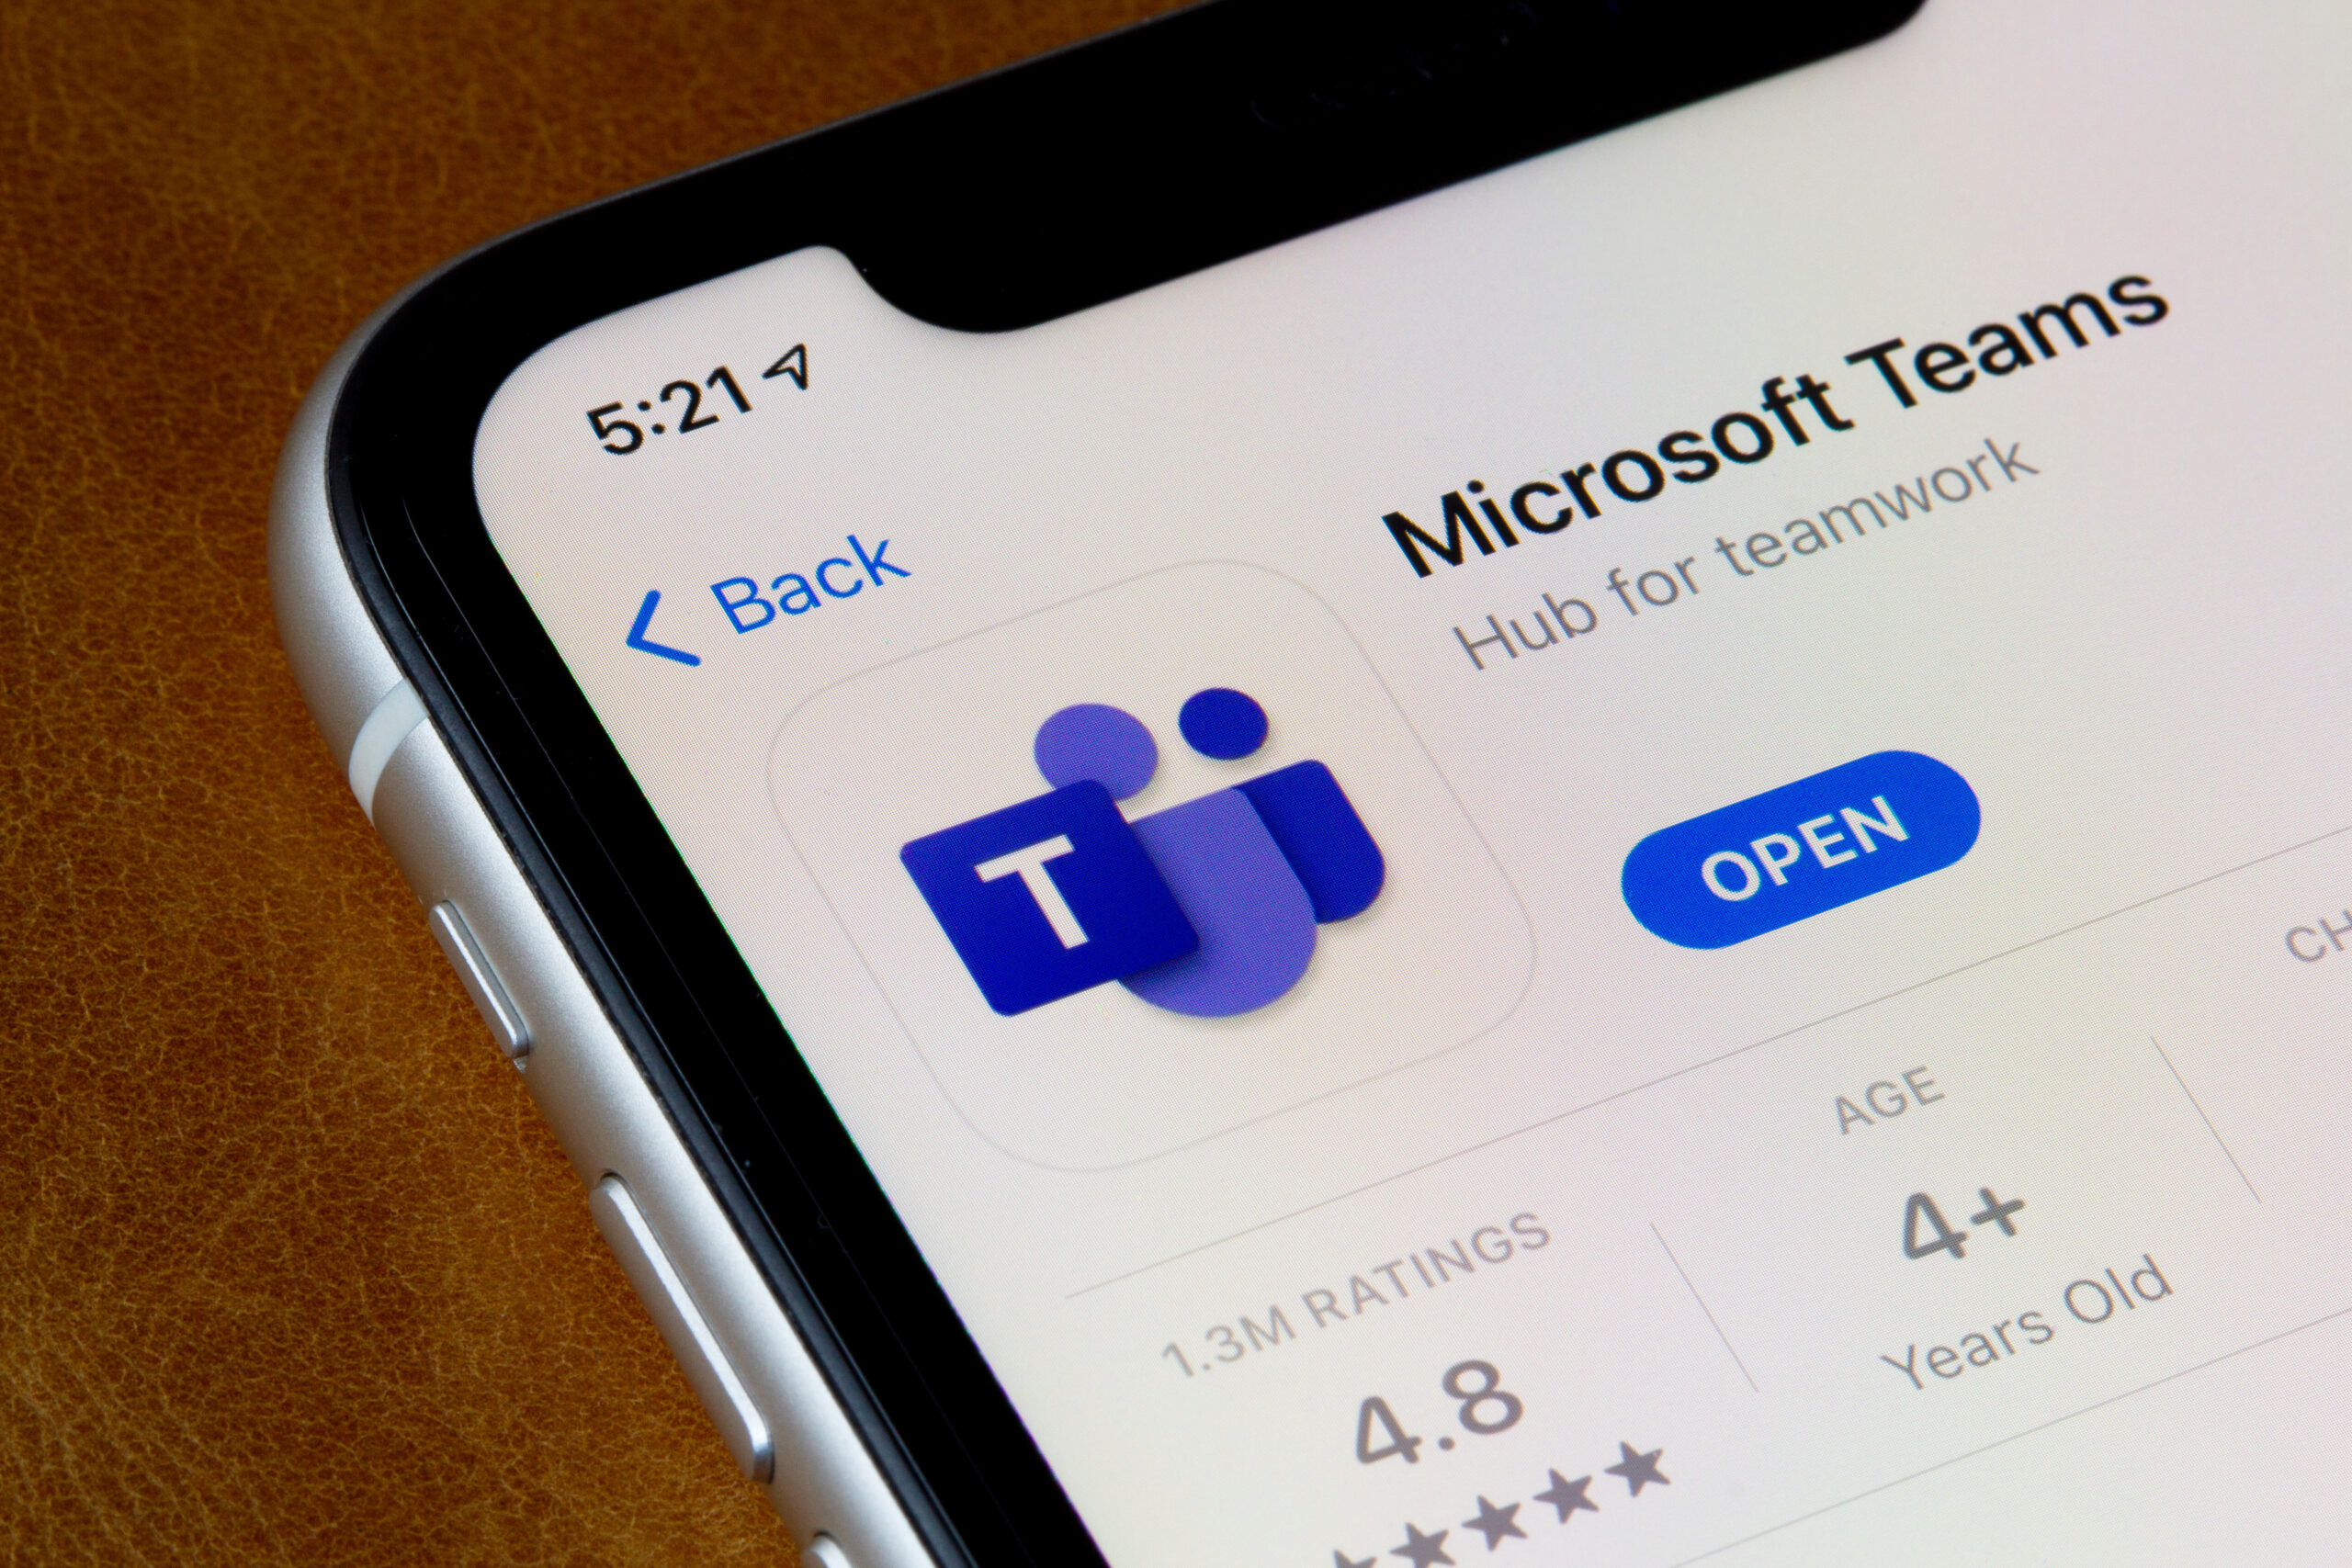 Microsoft Teams widely used internally? Here is 1 new TMNGH integration to adopt